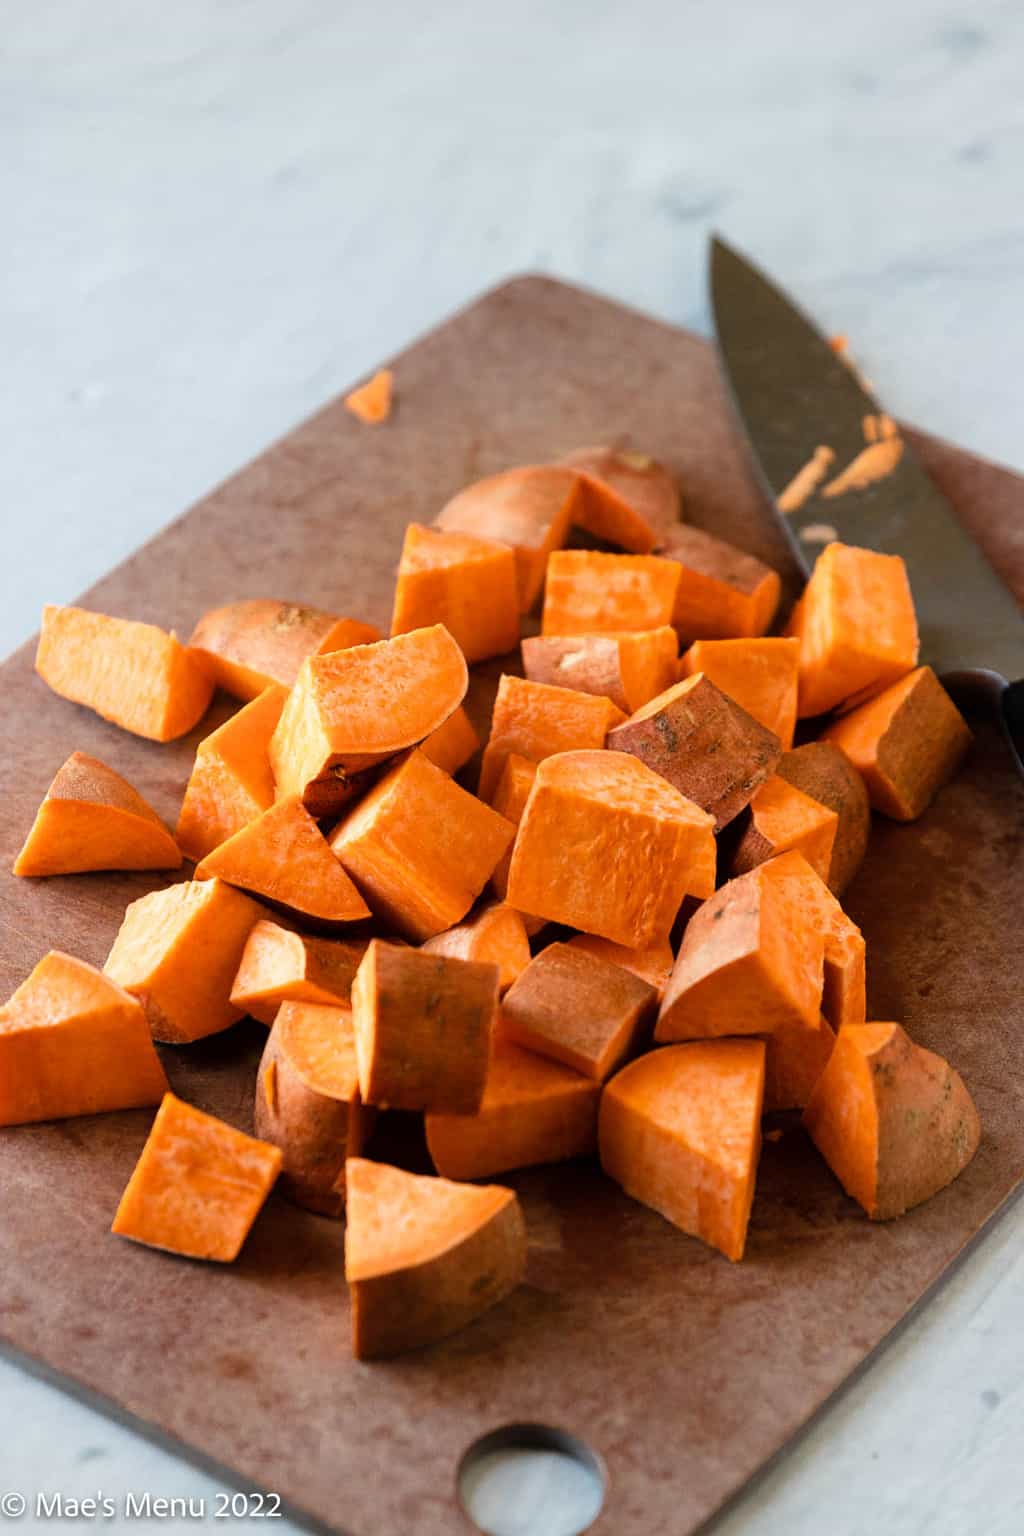 A cutting board of cubed sweet potatoes.